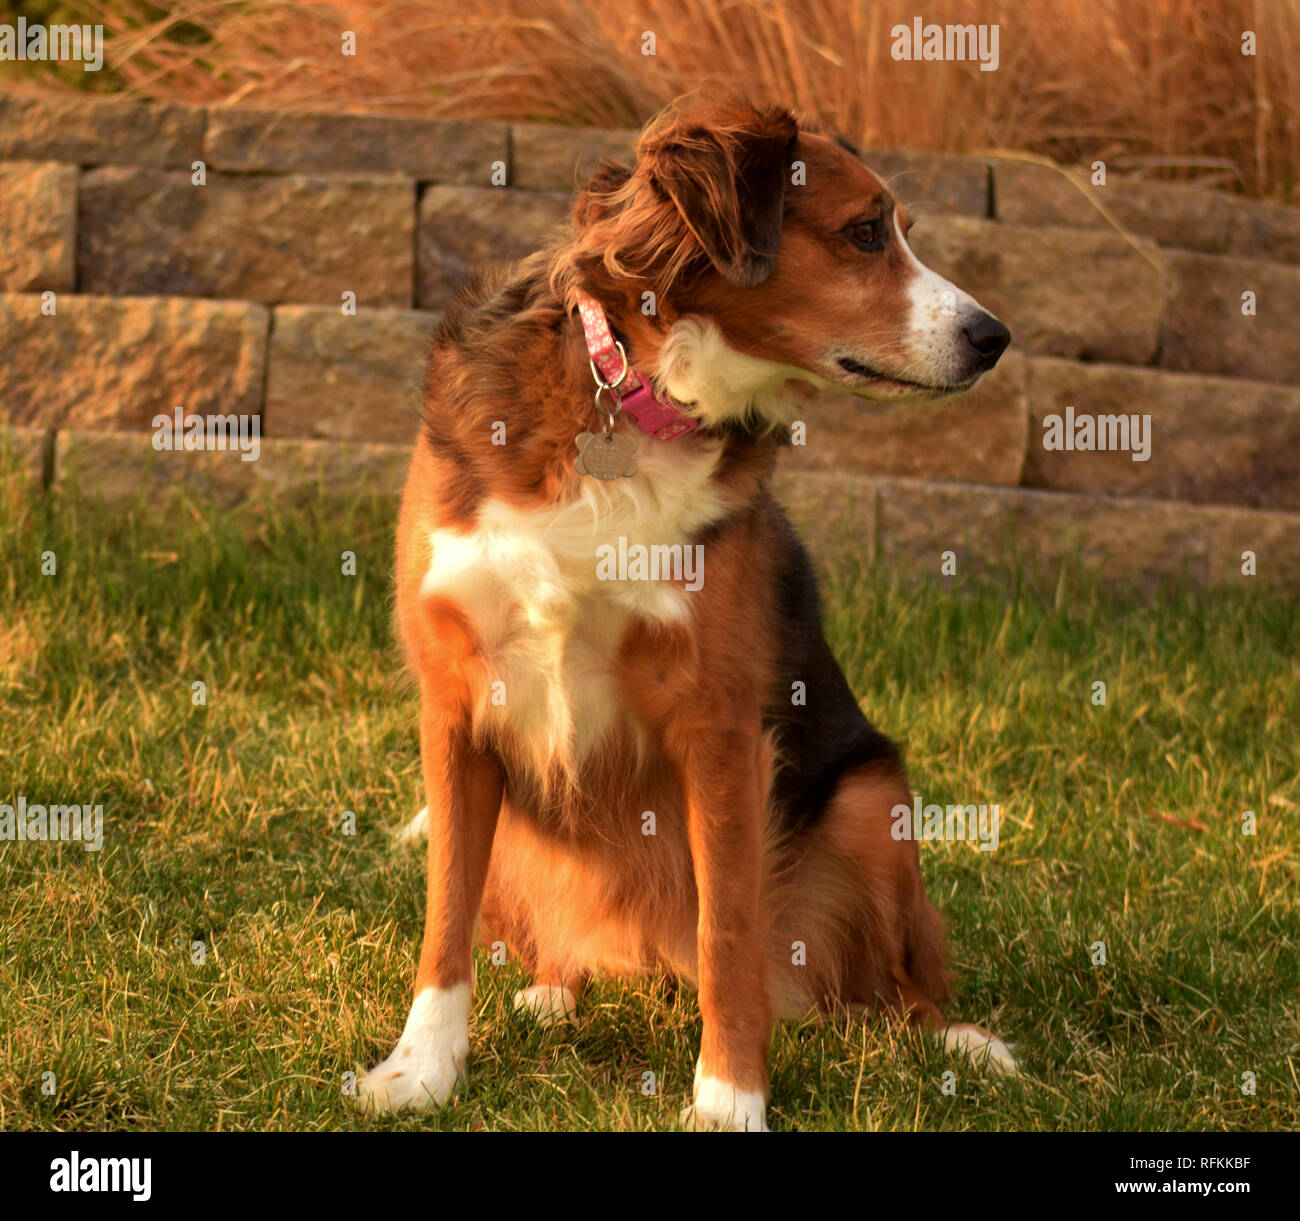 Australian Shepherd Border Collie Mix Sitting In The Grass On A Sunny Day Stock Photo Alamy